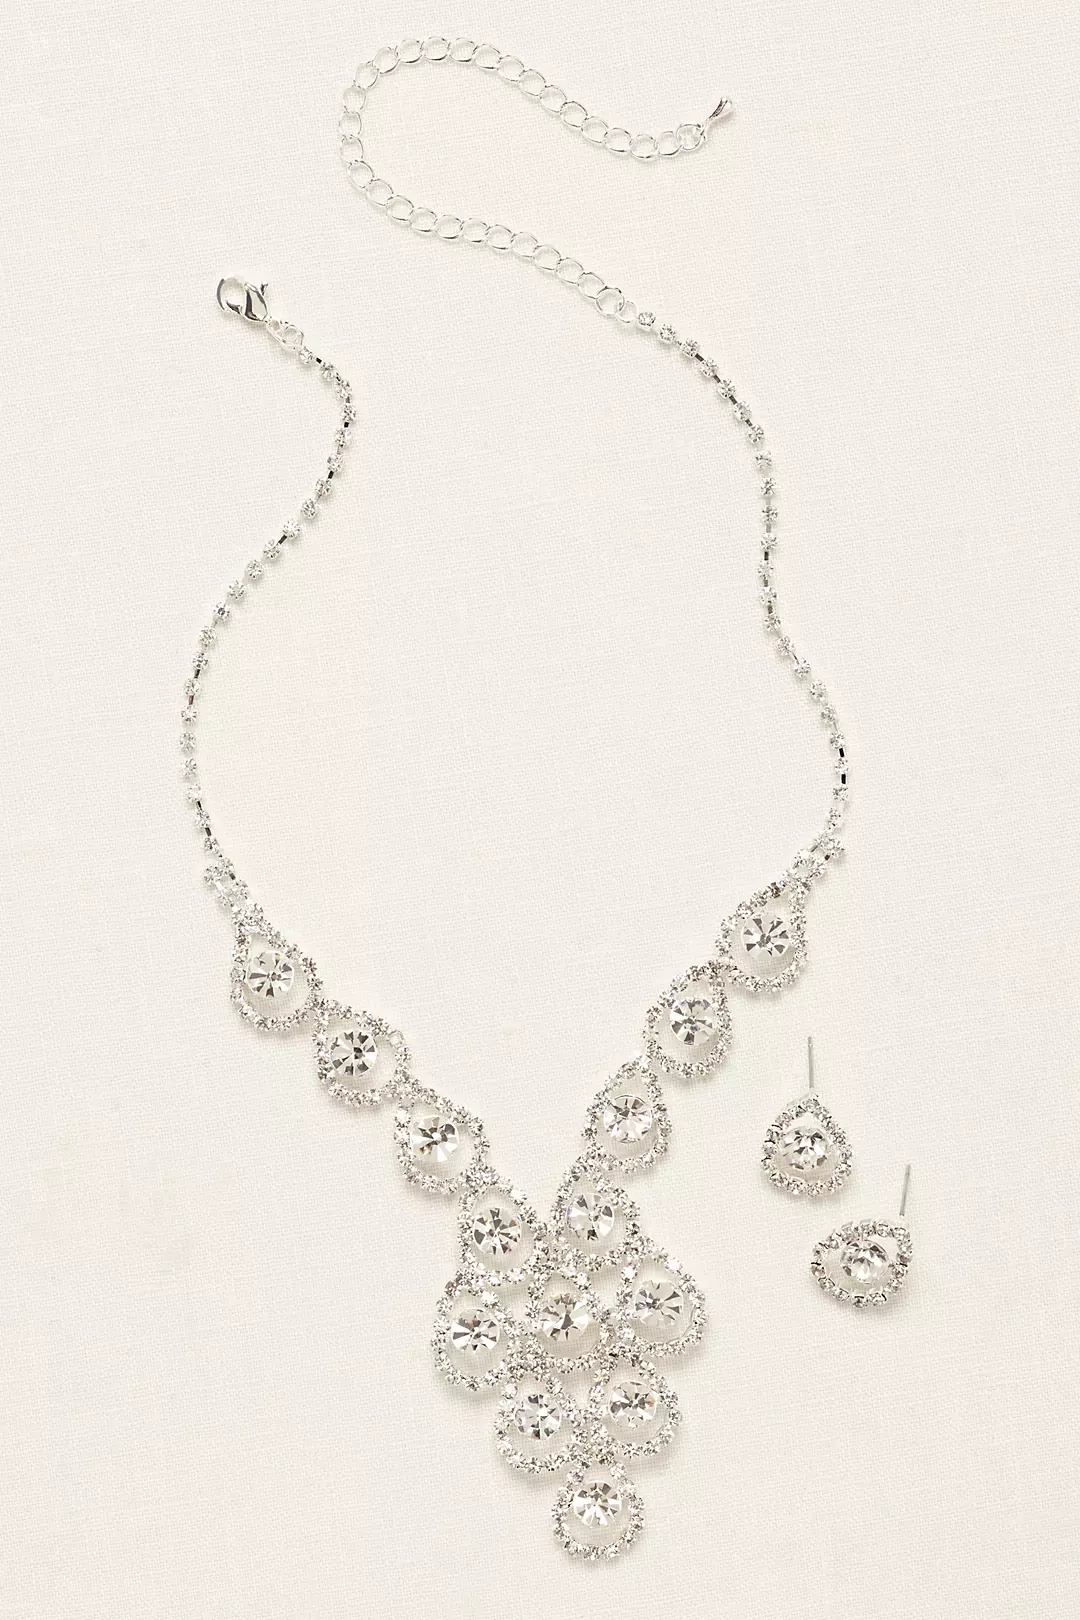 Tear Drop Pave Necklace and Earring Set Image 2